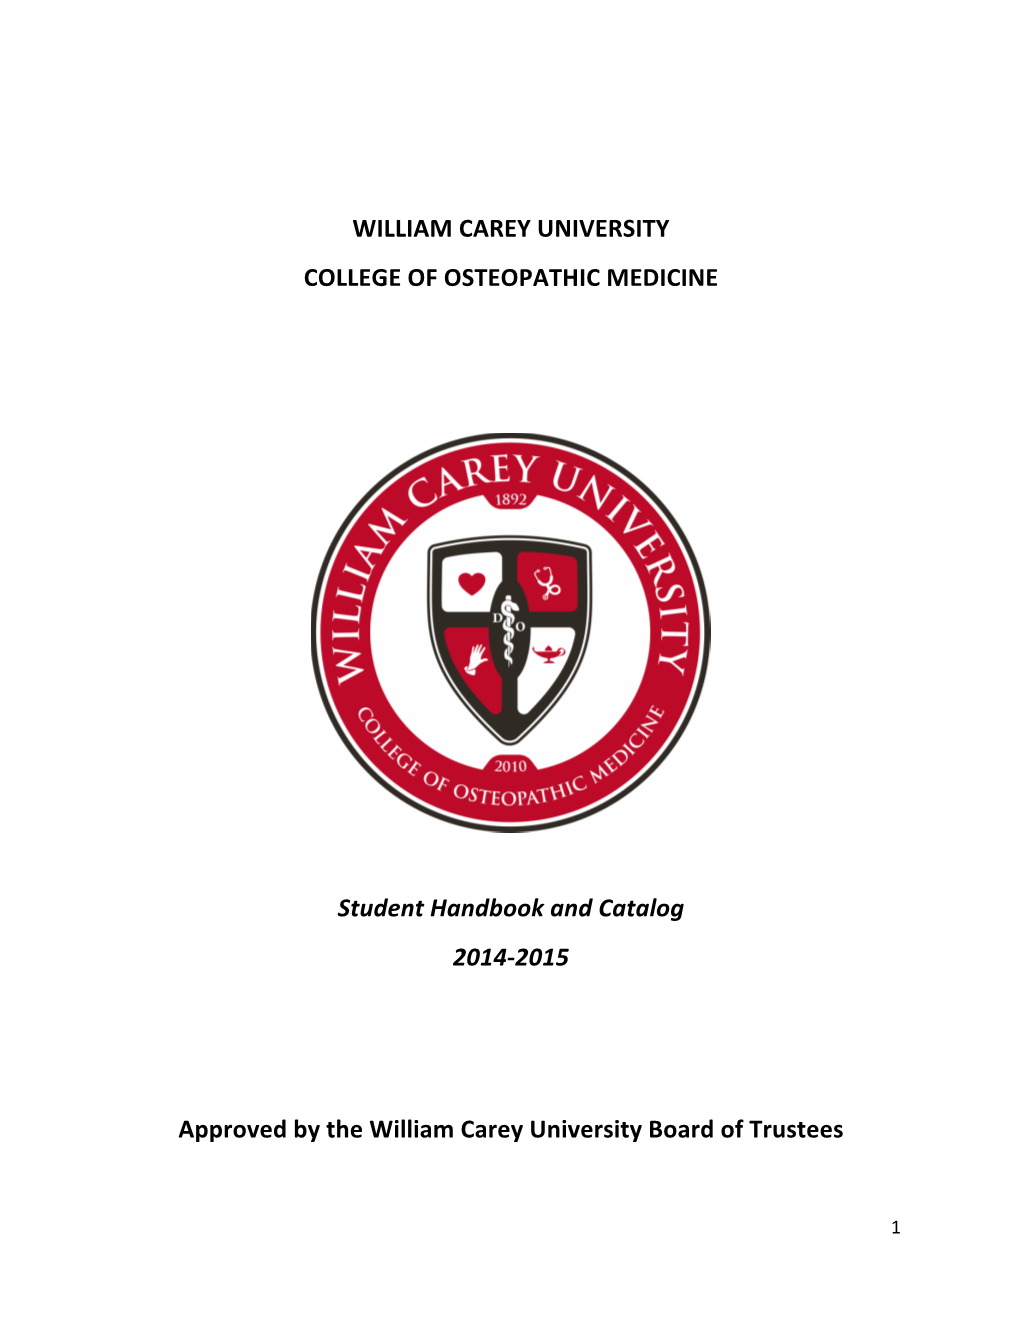 2014-2015 WCUCOM Student Handbook and Catalog WCUBOT Approved FINAL BW